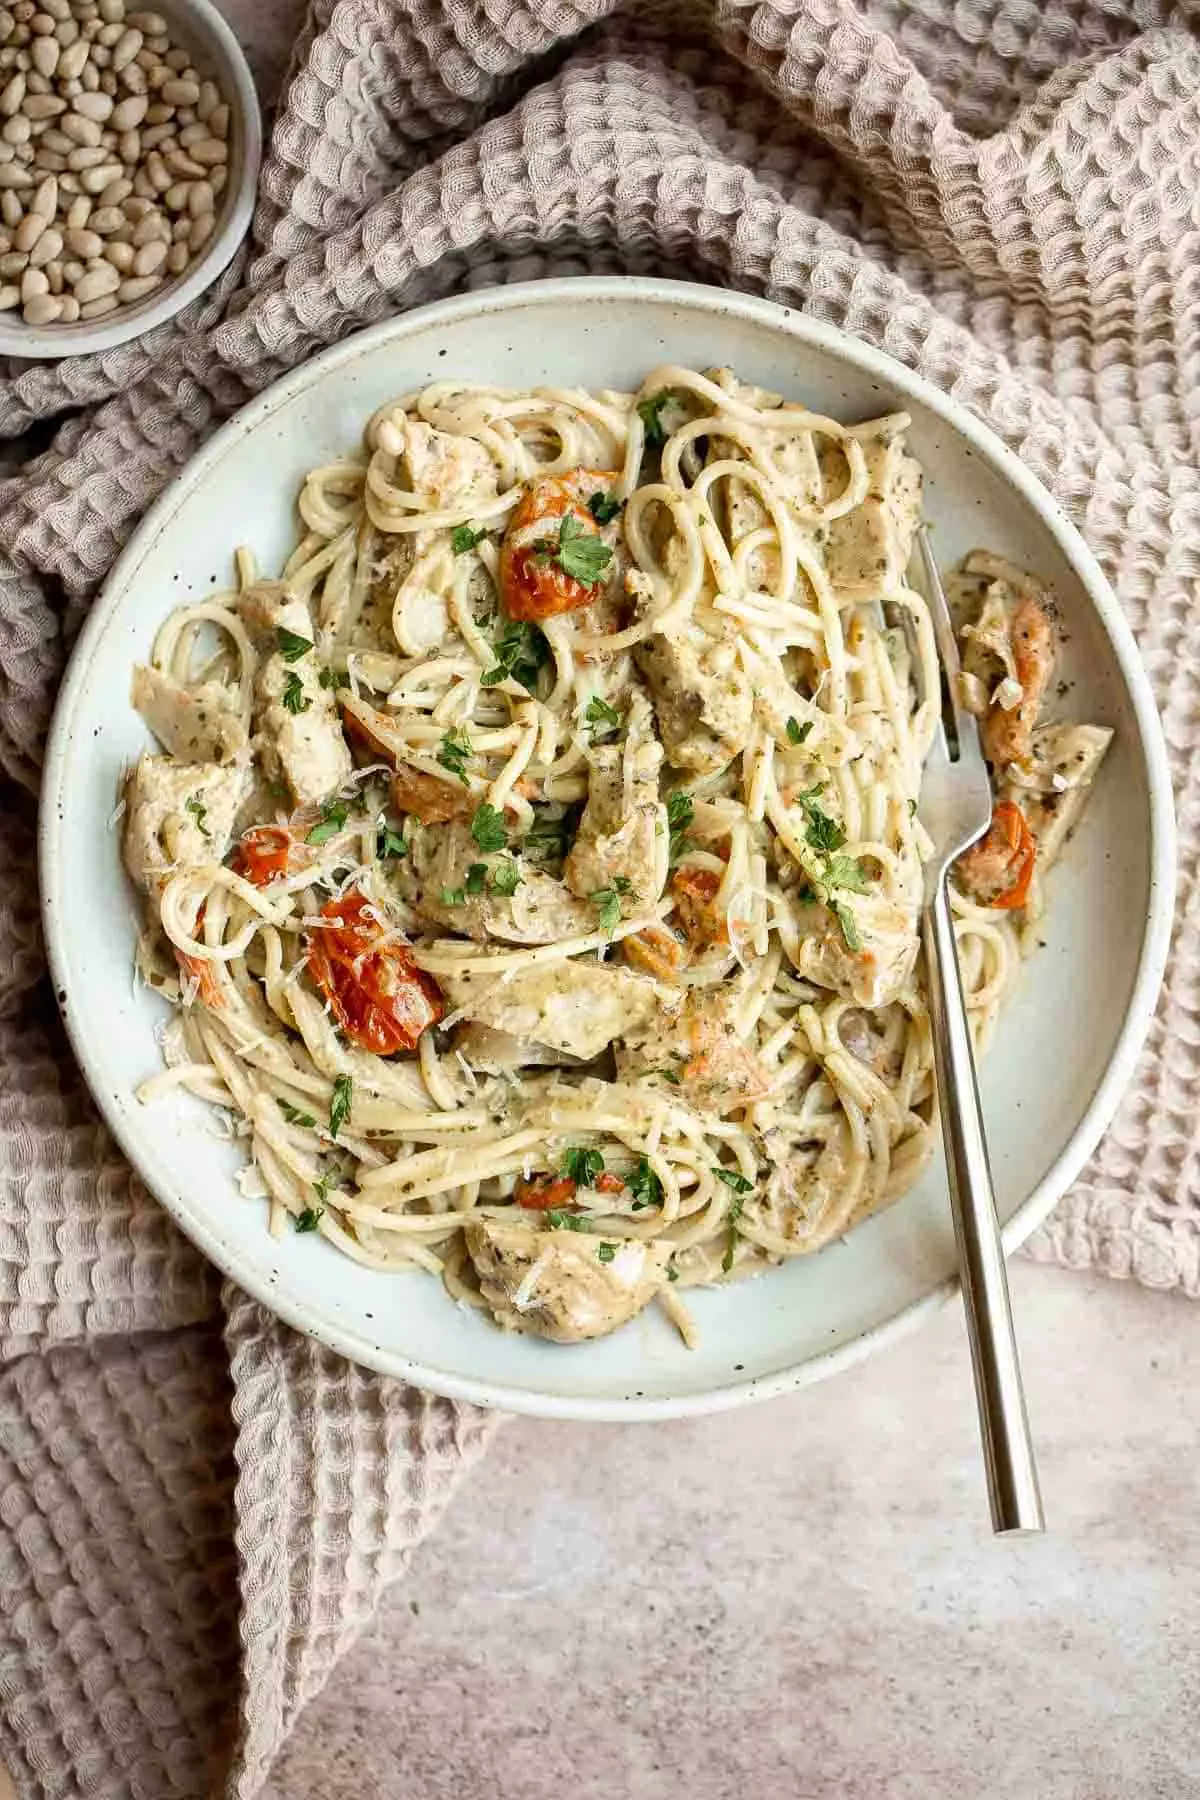 Creamy Chicken Pesto Pasta is a delicious 30 minute recipe that is packed with flavor, quick and easy to make, and will satisfy the whole family.